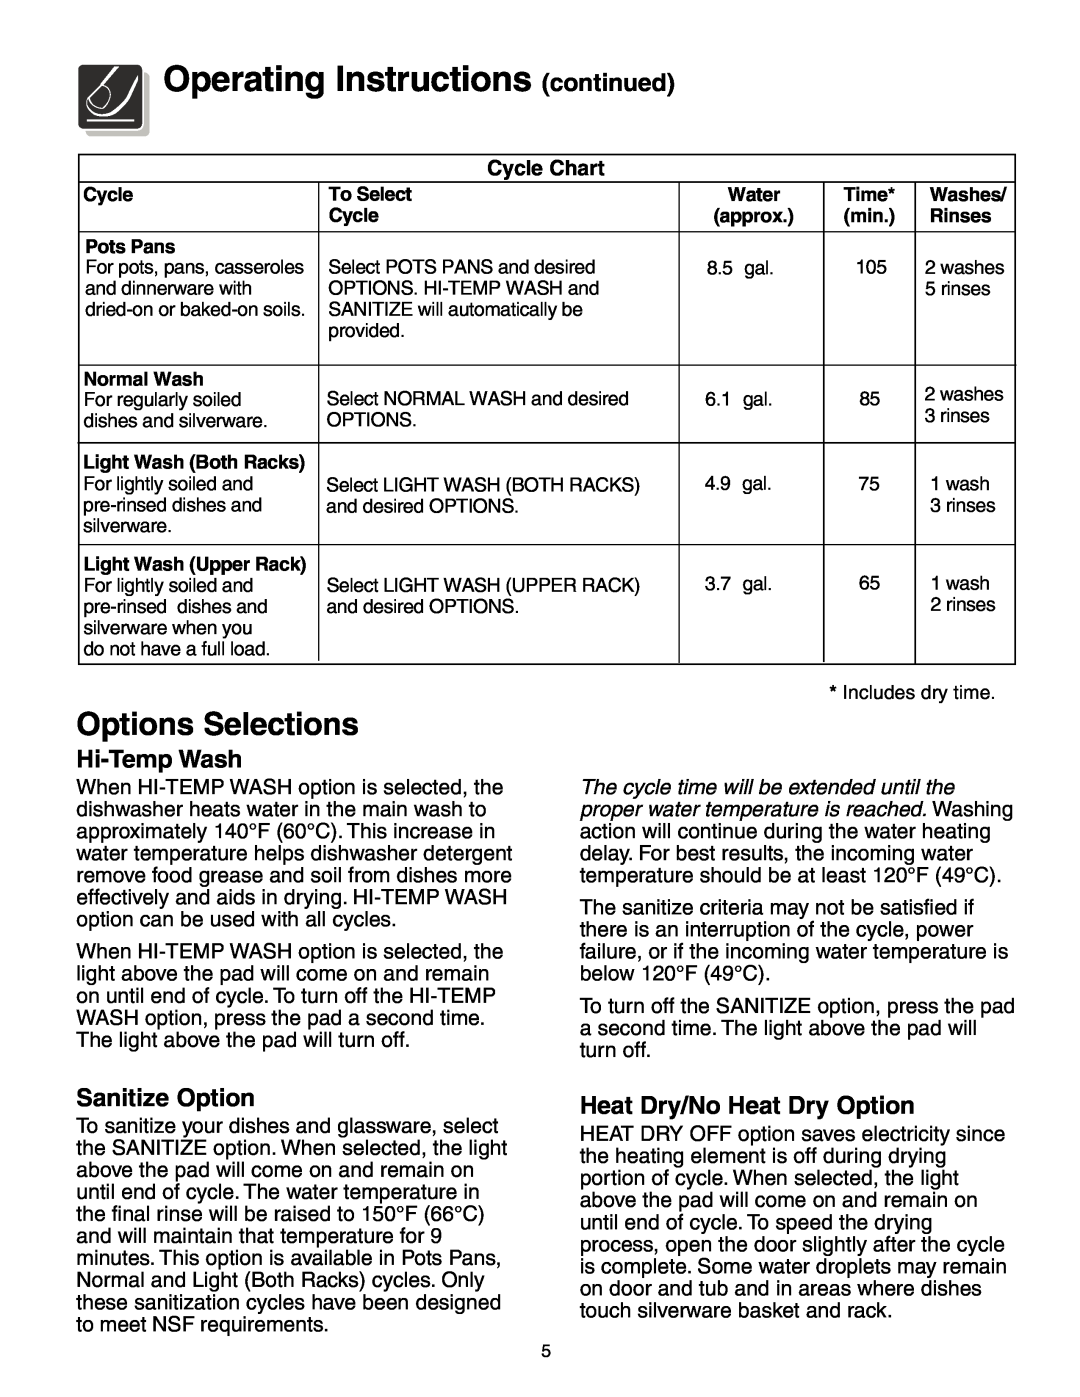 Frigidaire 950 Series warranty Operating Instructions continued, Options Selections, Hi-TempWash, Sanitize Option 